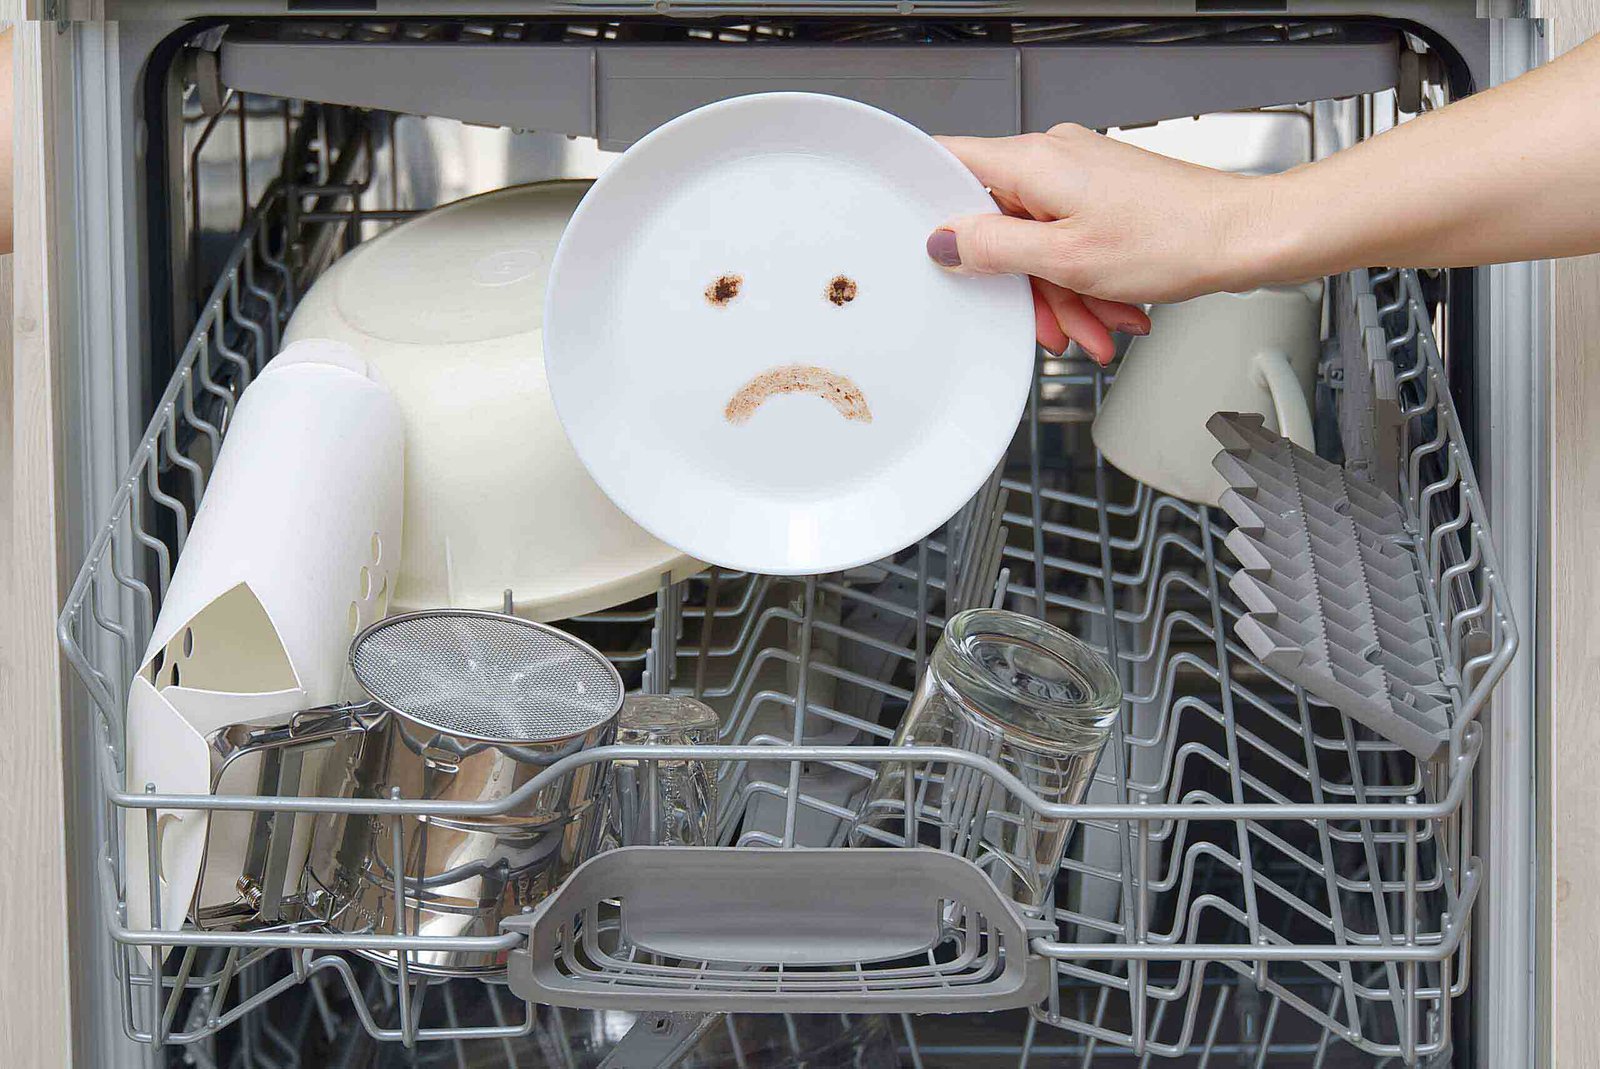 How to Install a Dishwasher in a New Kitchen